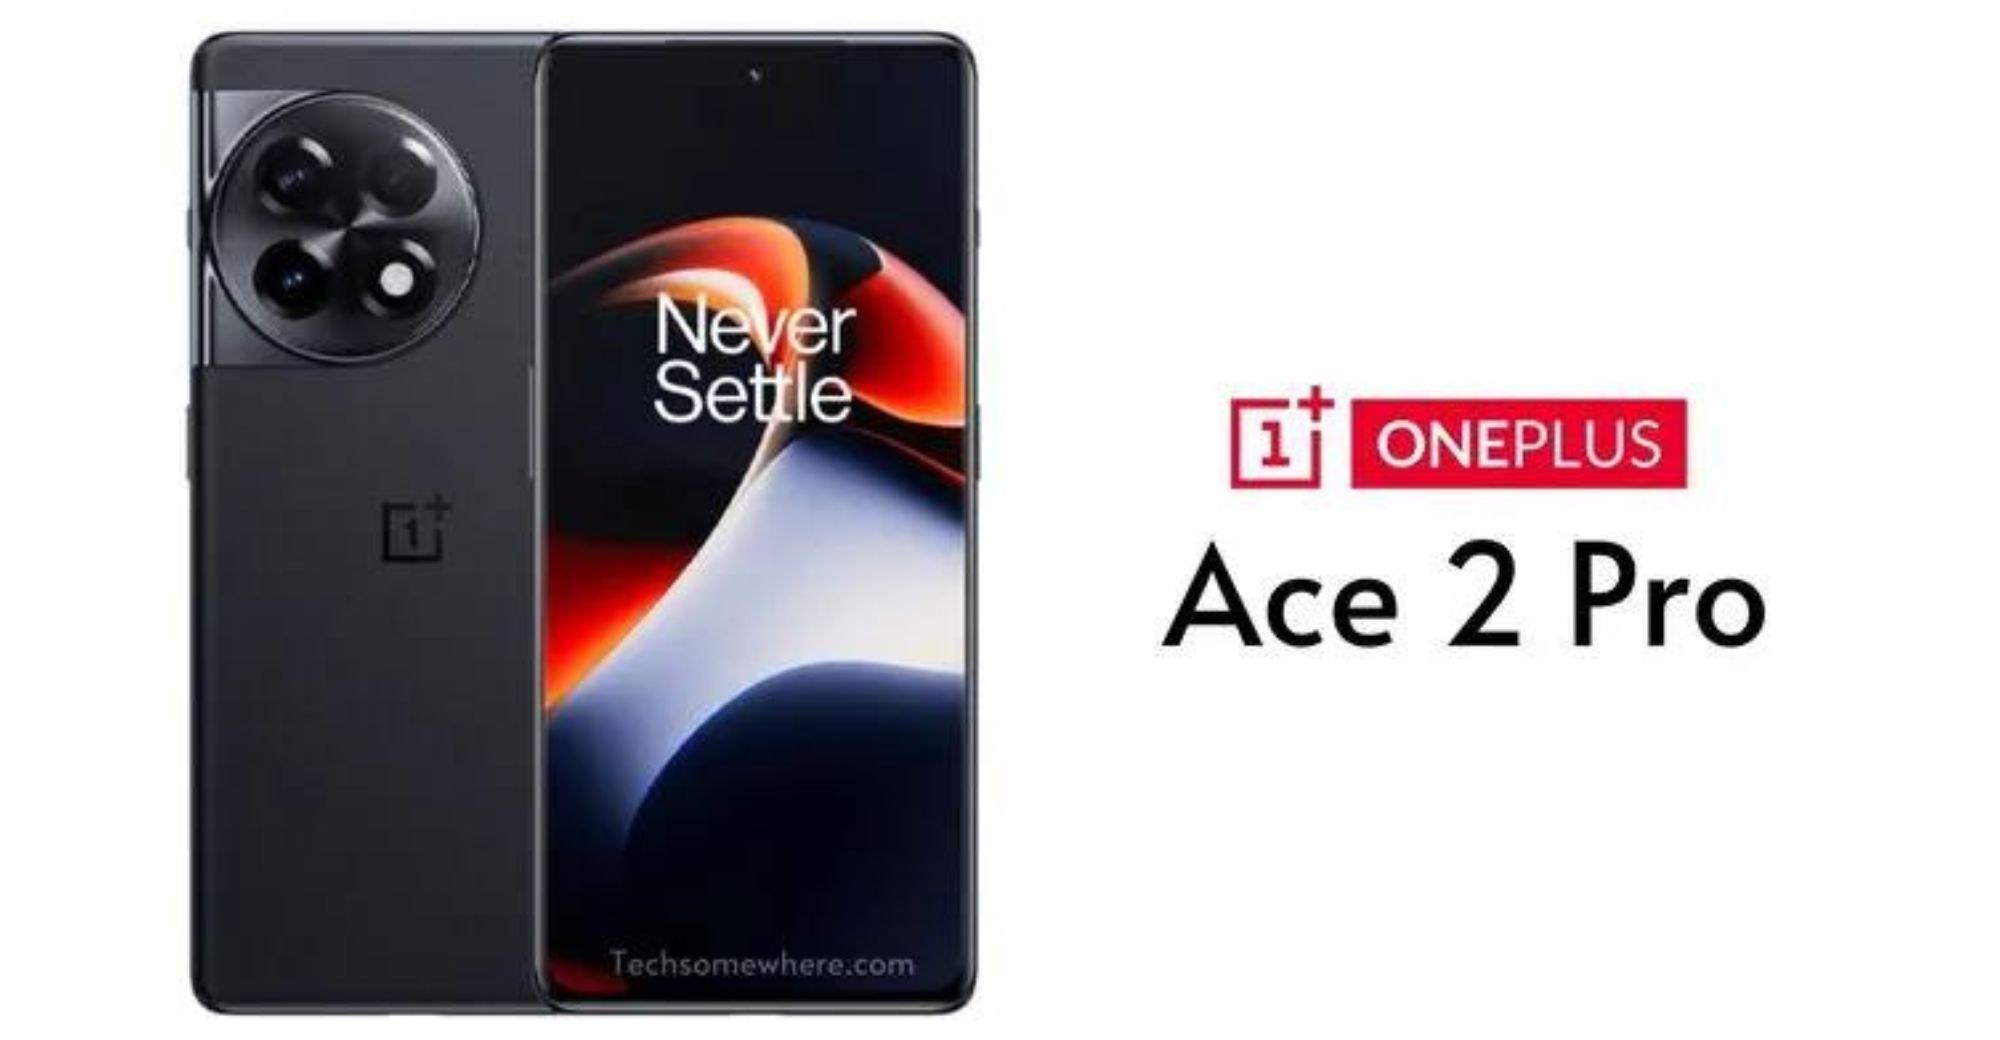 OnePlus Releases Ace 2 Pro, Starting at A Price of $411